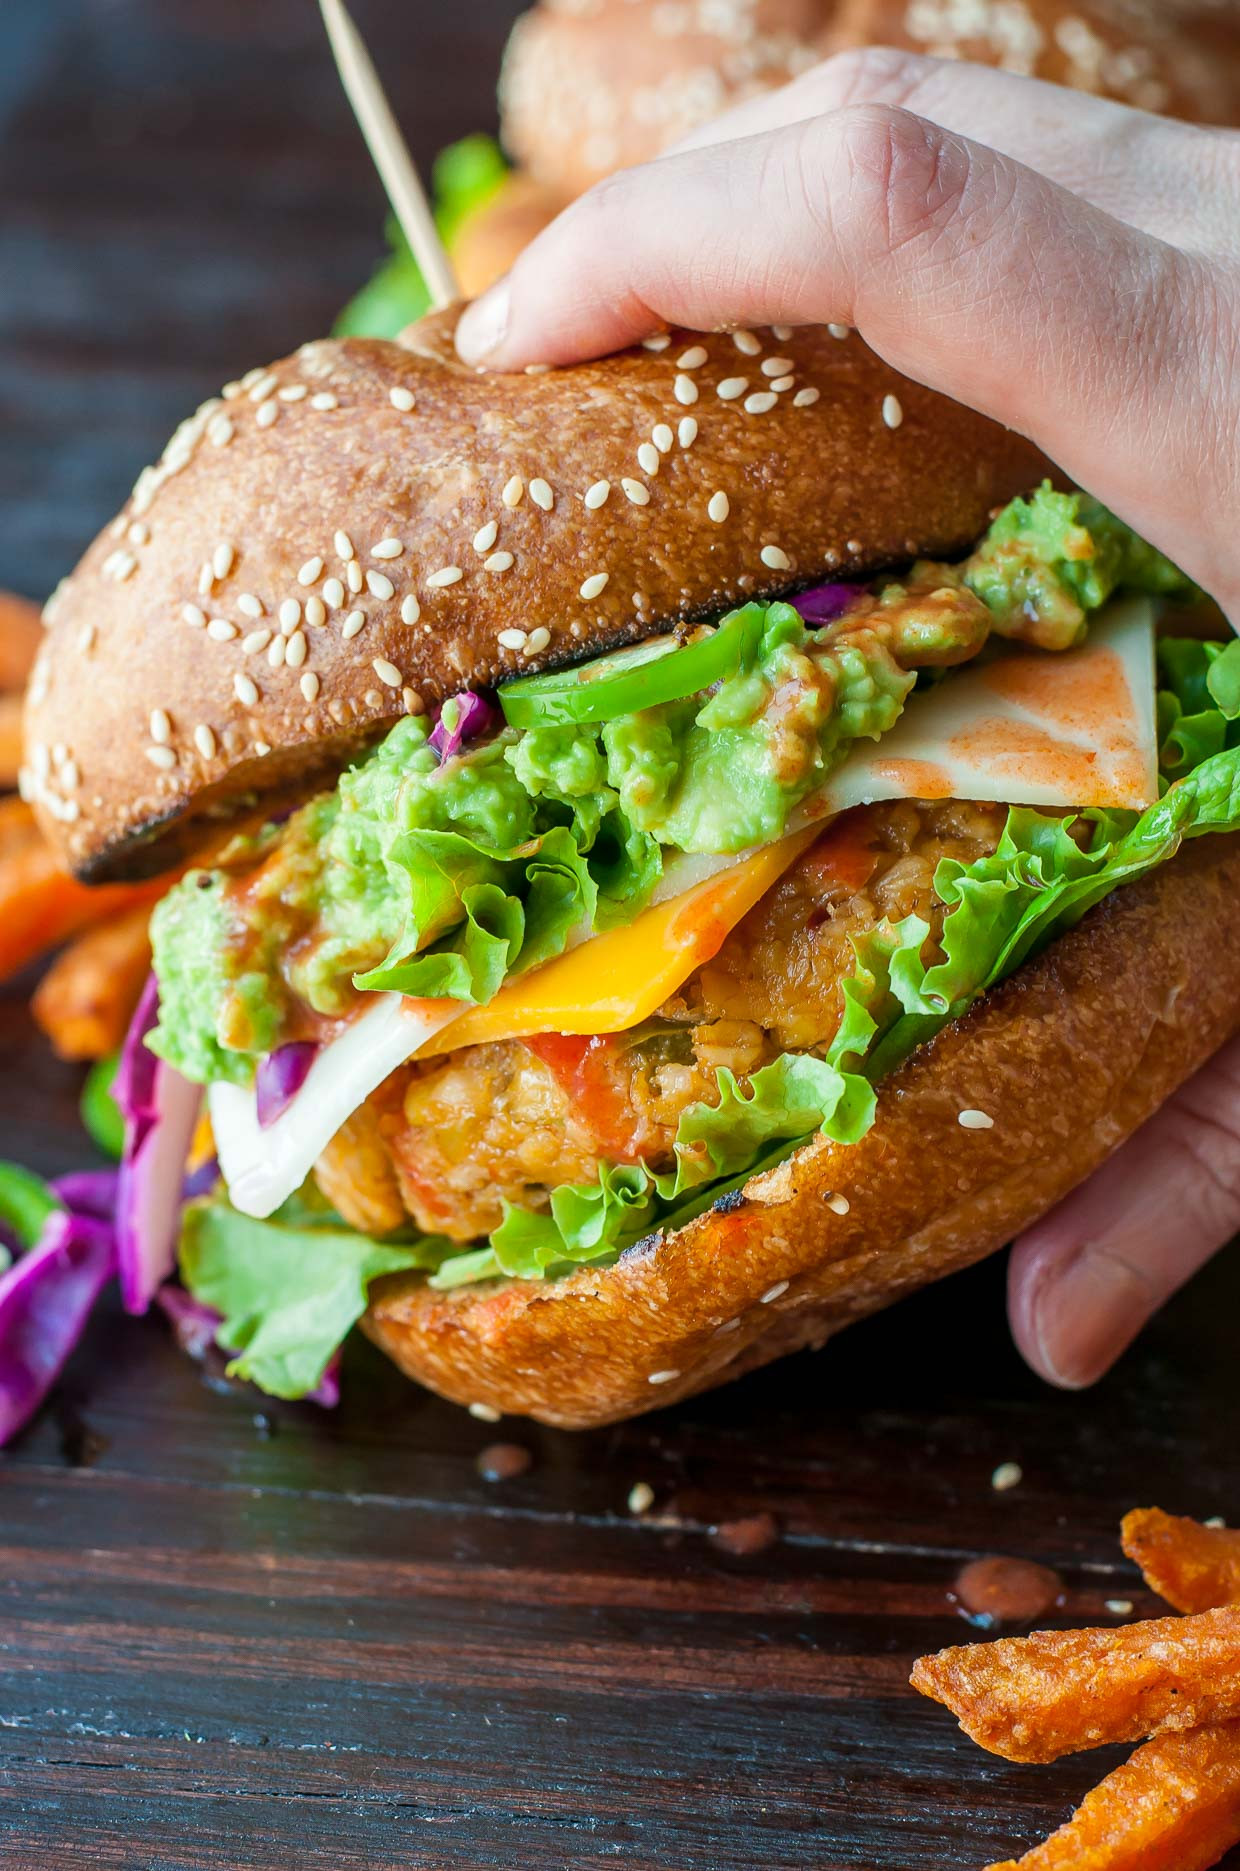 Vegan Chickpea Burgers Recipes
 15 New Burger Ideas for Your Summer Cookout